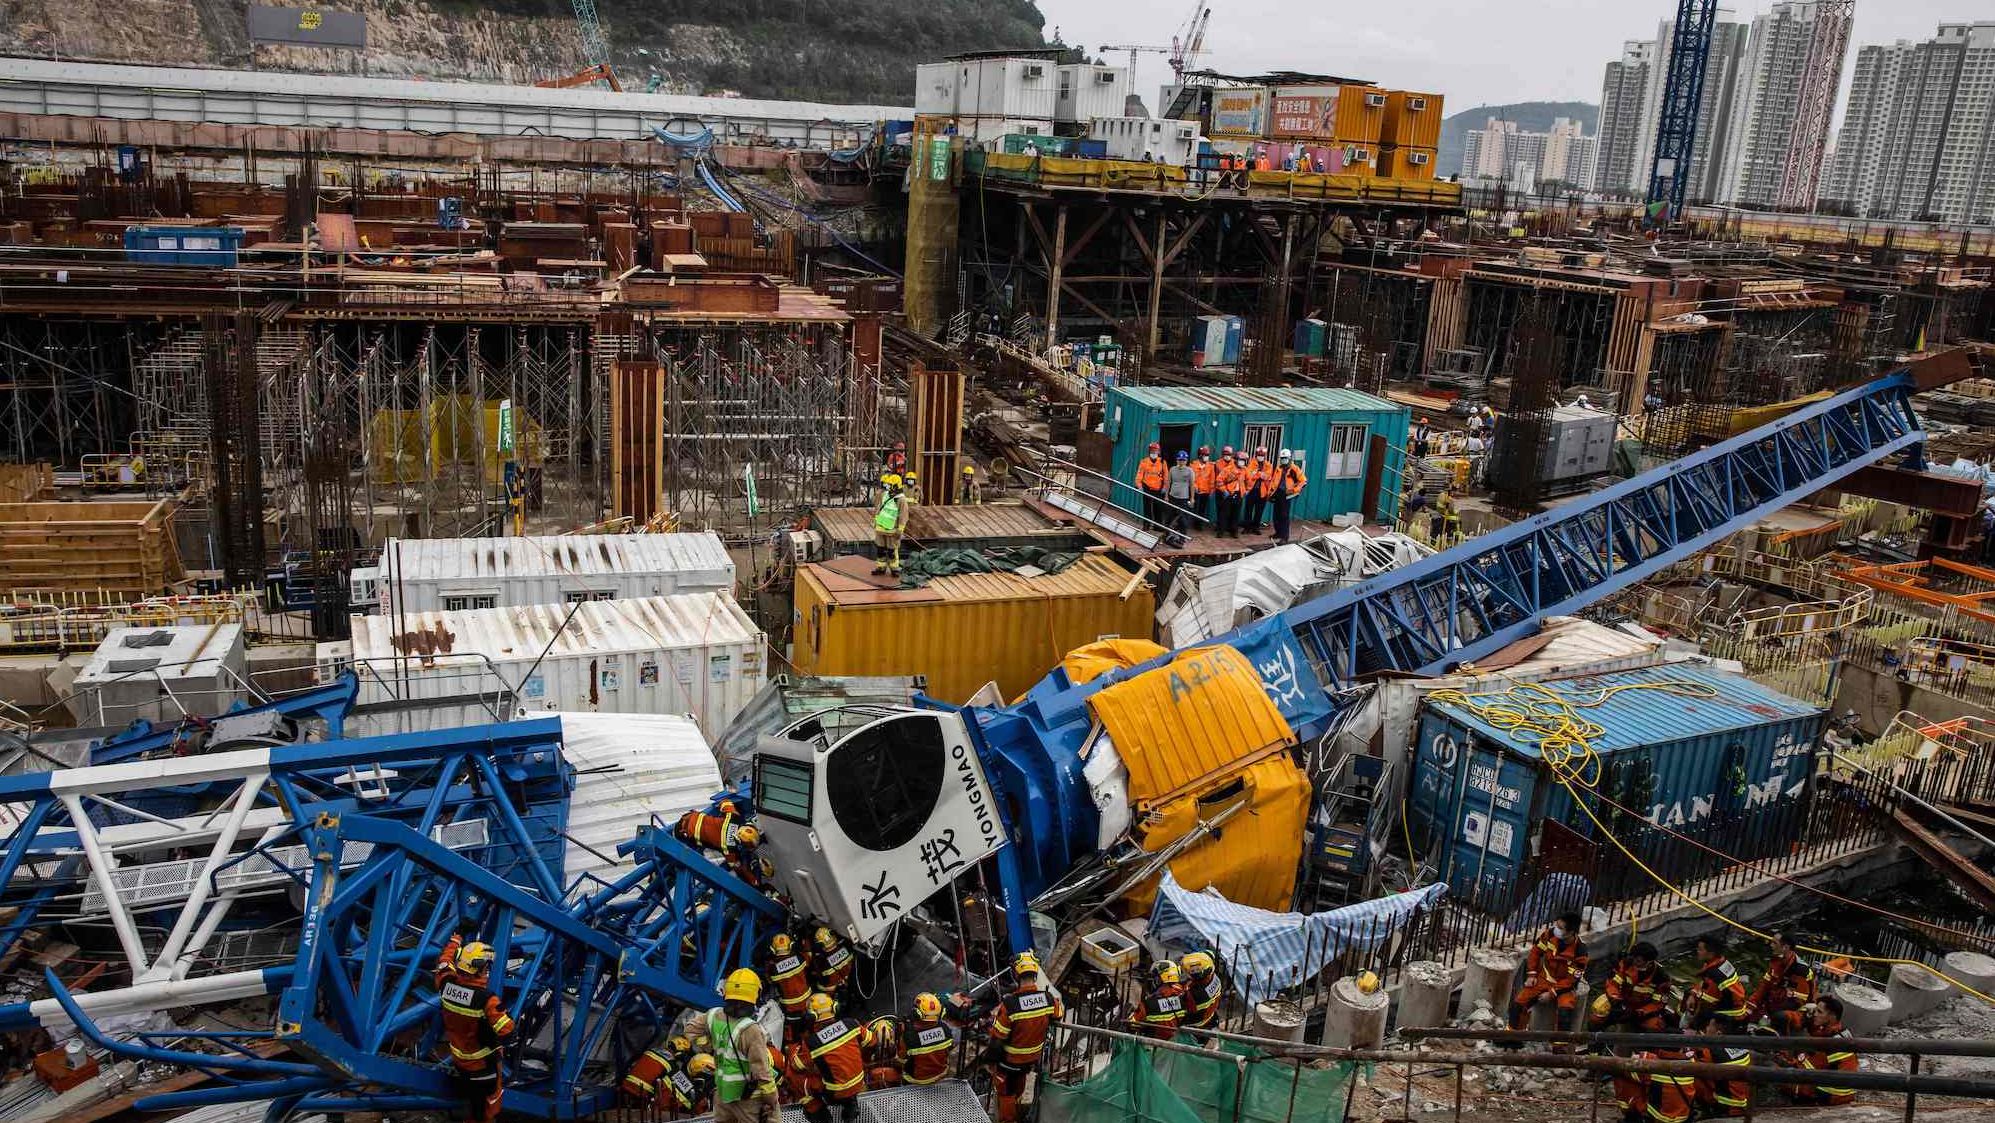 A search-and-rescue team works at the site of a collapsed crane in Hong Kong on Wednesday, September 7. At least two people were killed, and more were injured.